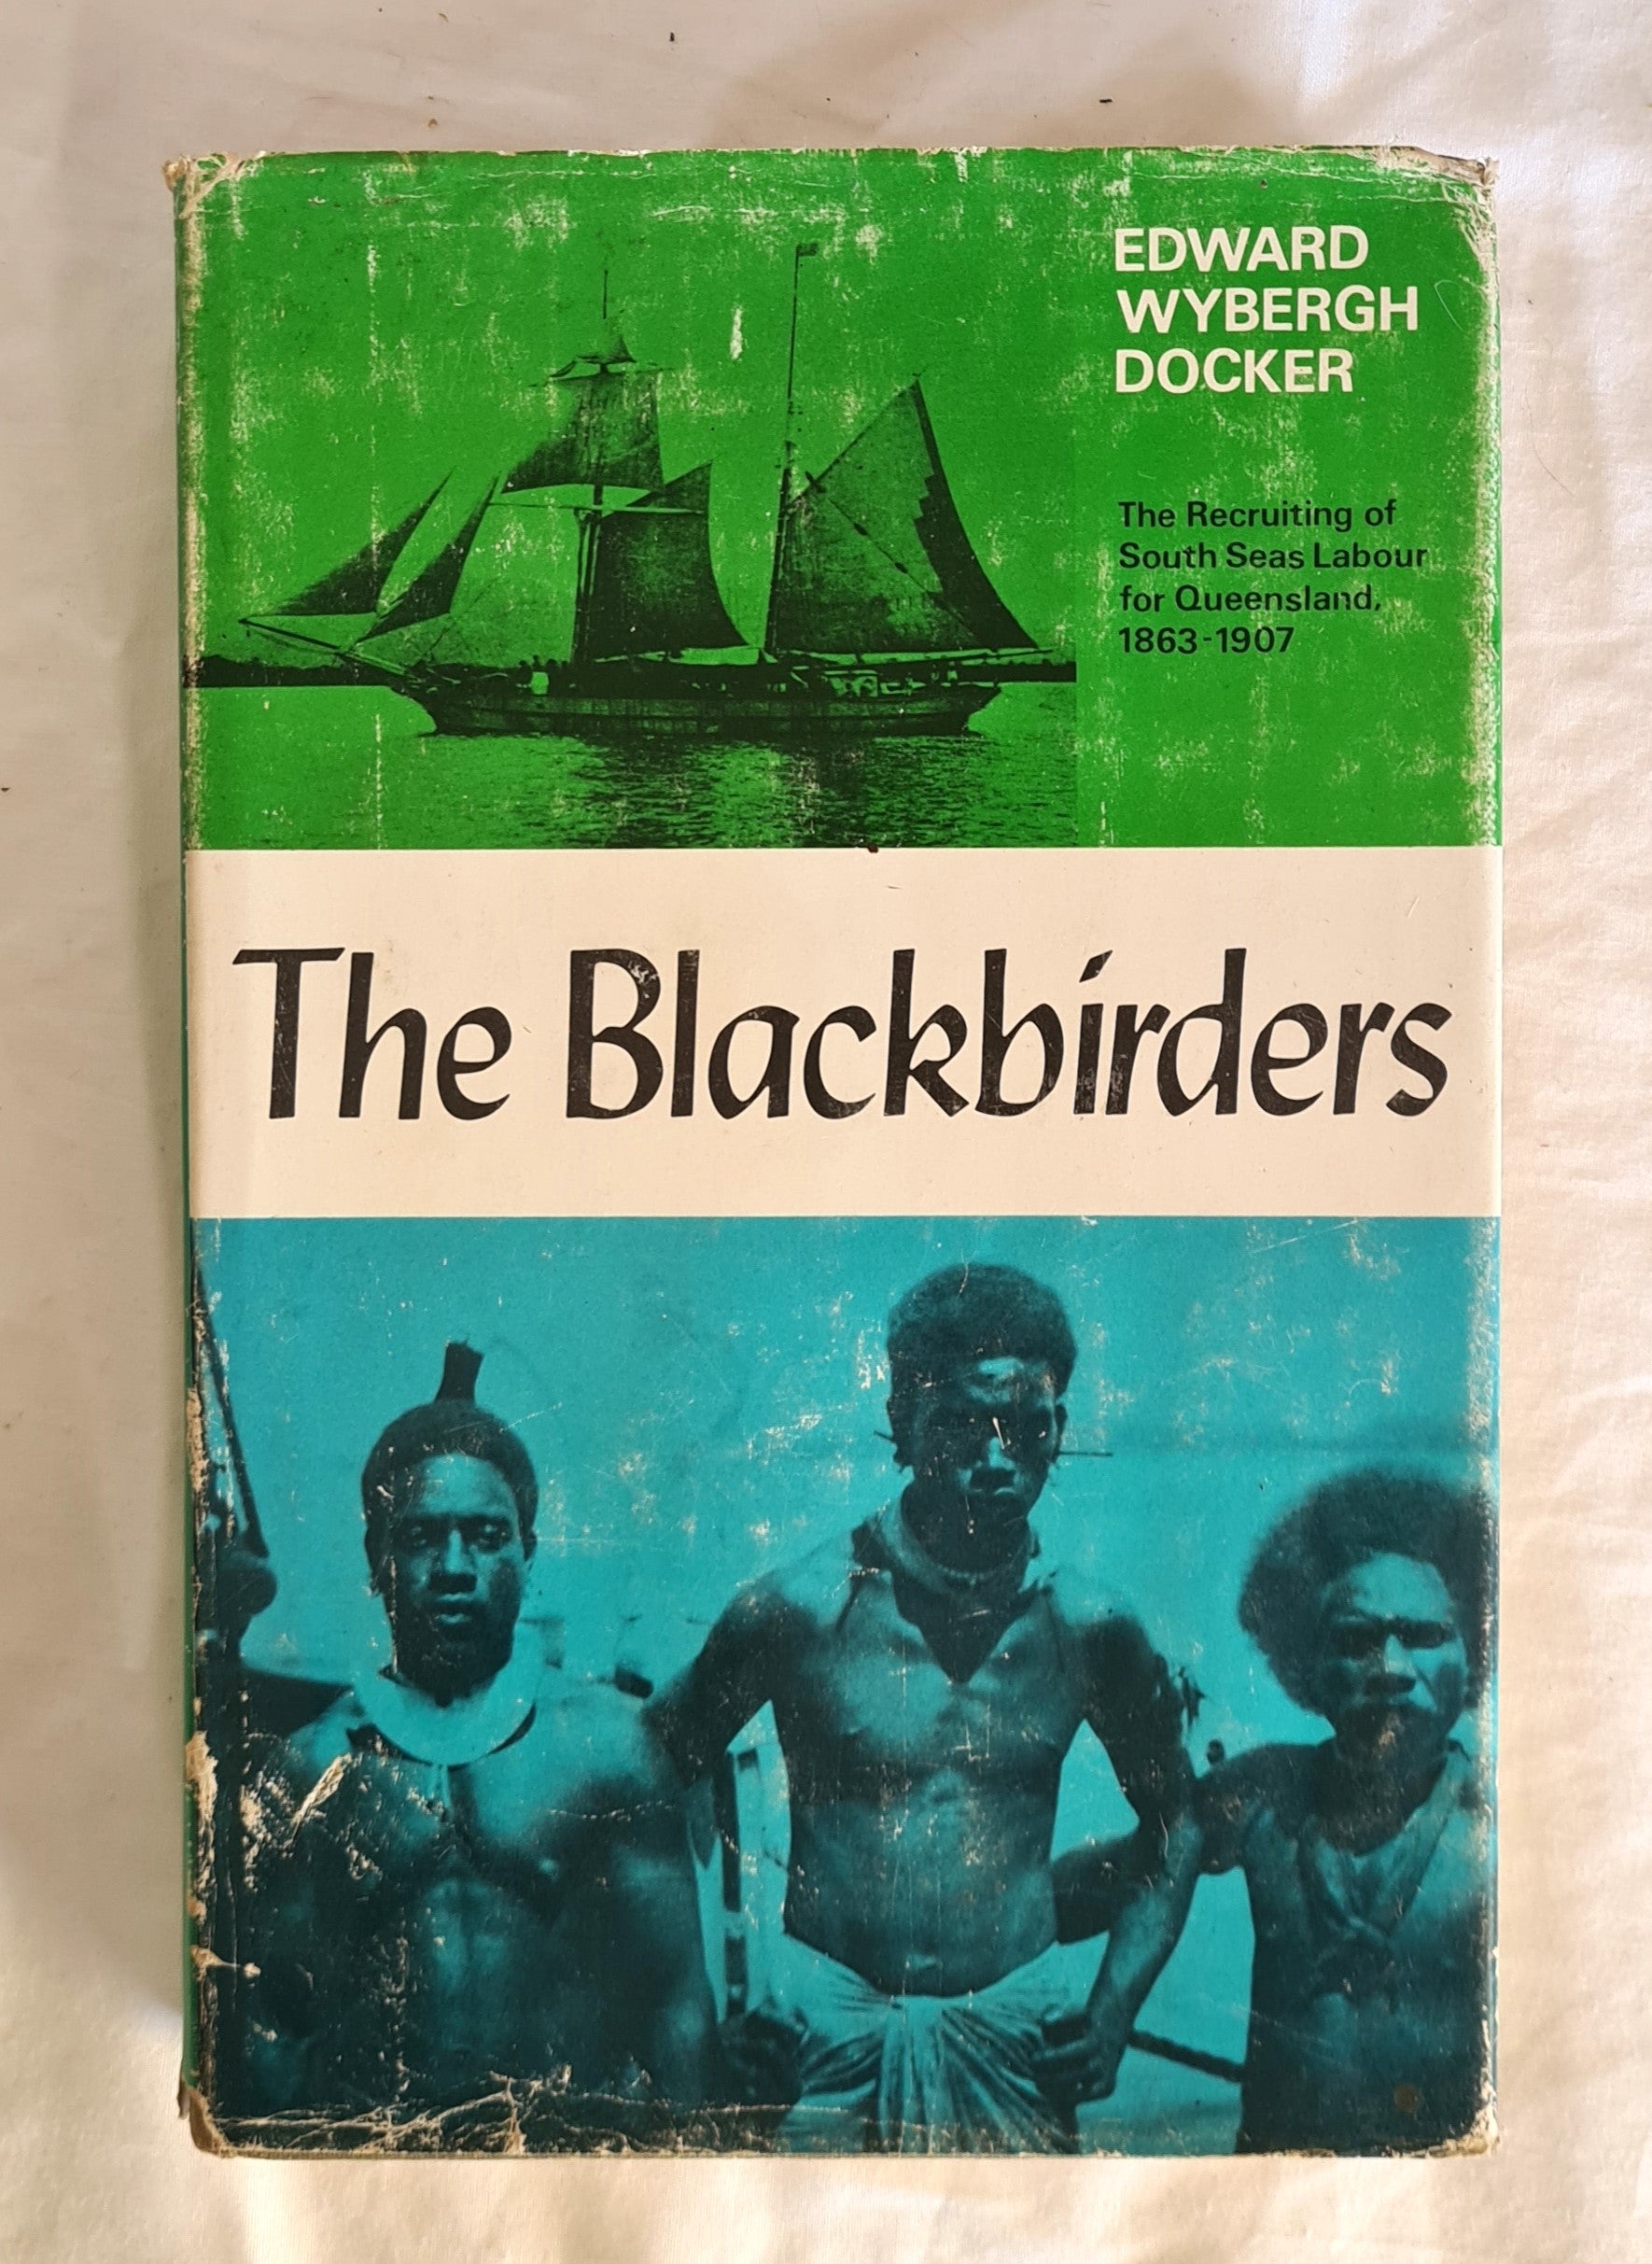 The Blackbirders  The Recruiting of South Seas Labour for Queensland, 1863-1907  by Edward Wybergh Docker